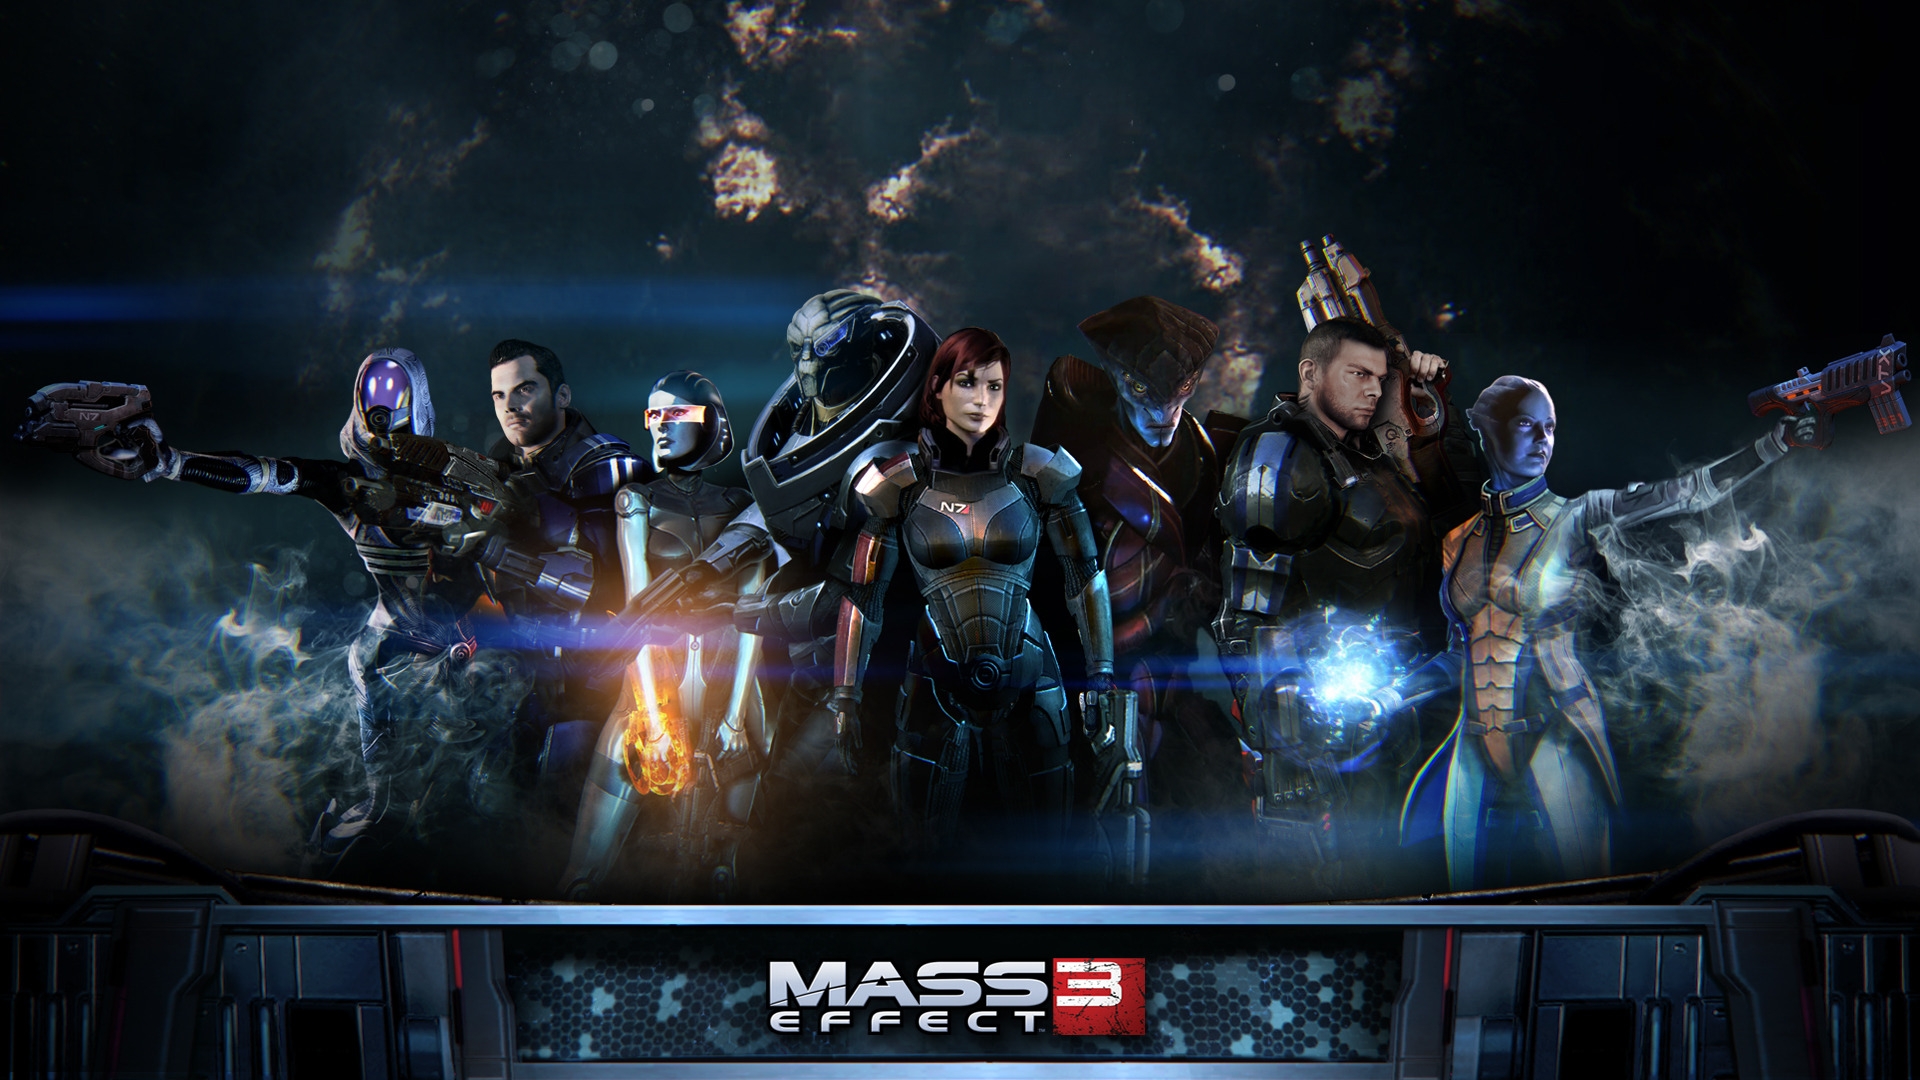 Mass Effect 3 Characters for 1920 x 1080 HDTV 1080p resolution